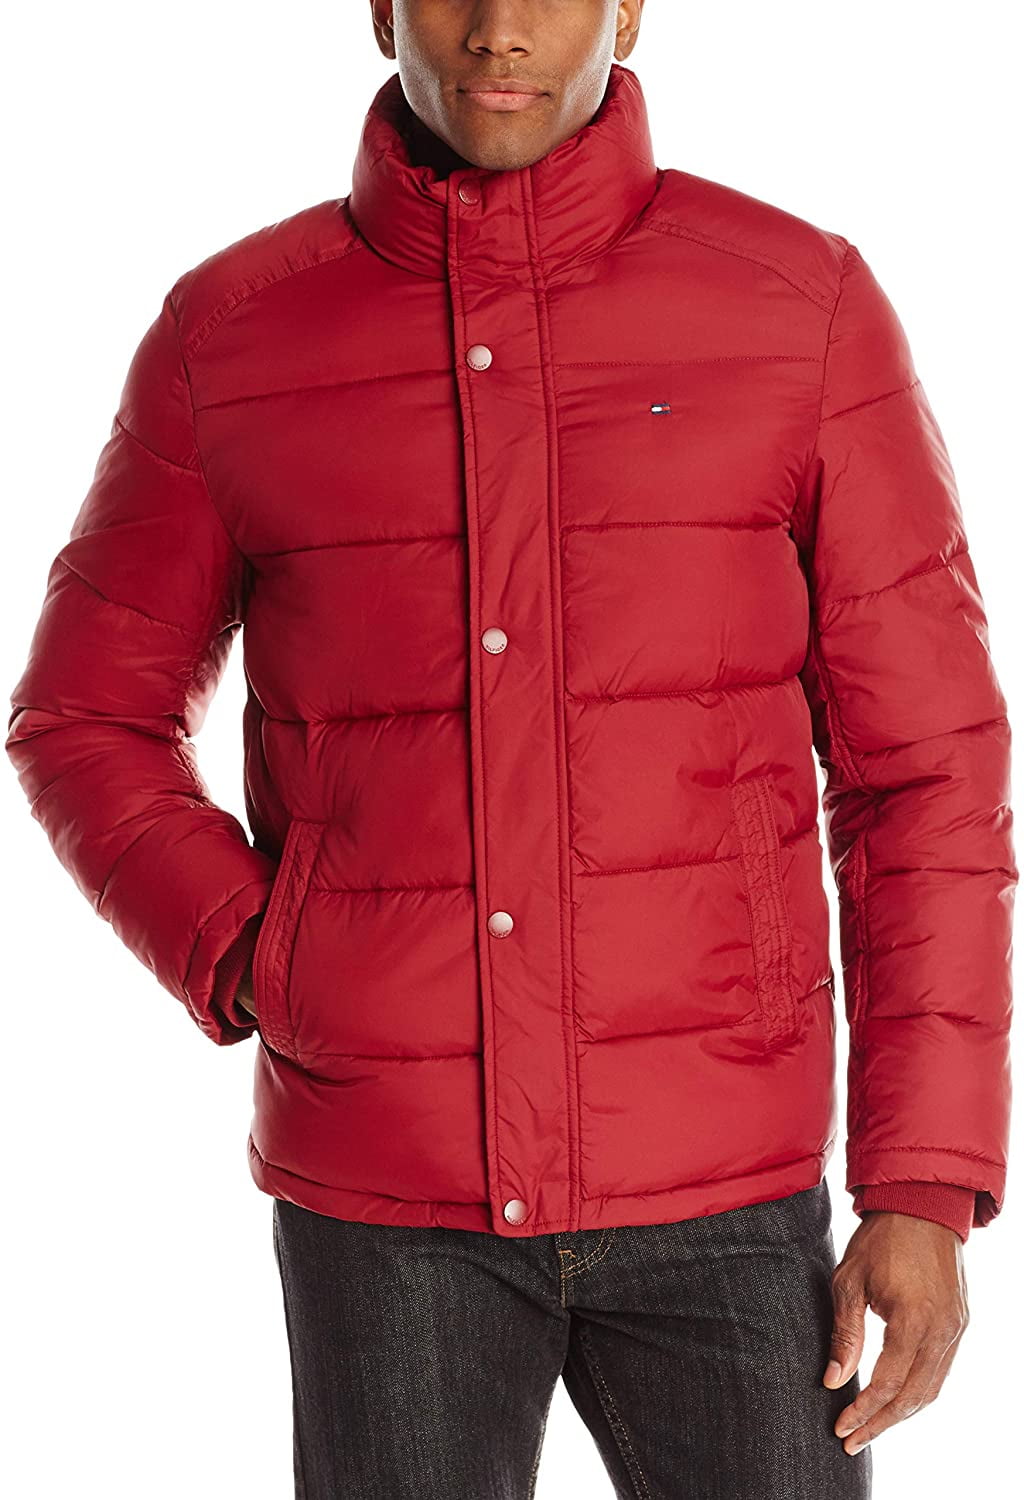 Classic Puffer Jacket, Red, XX-Large 